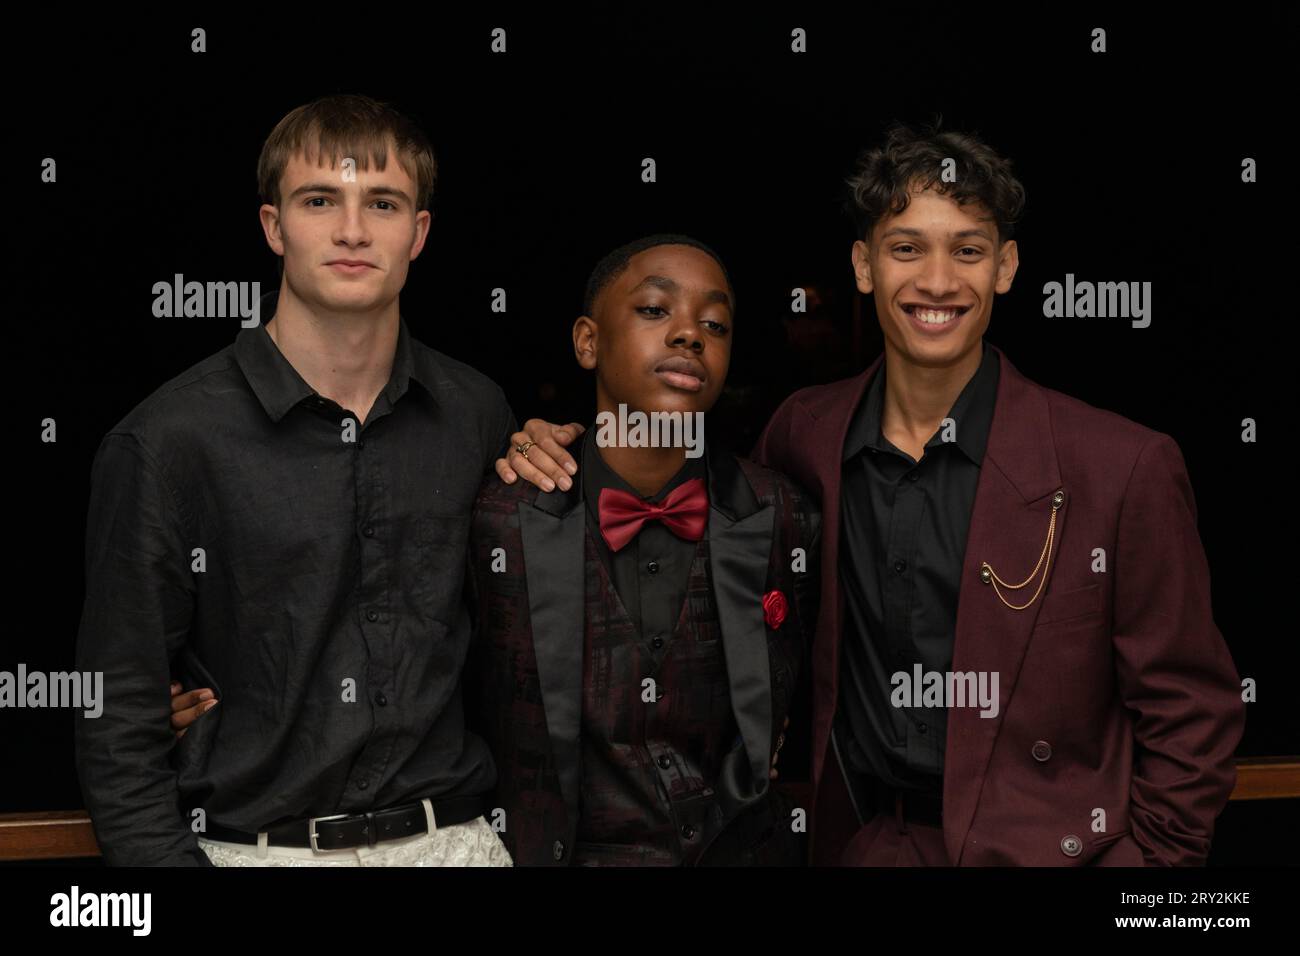 In a close-up shot, three stylish multiracial young men at prom exude confidence and camaraderie as they strike a pose Stock Photo